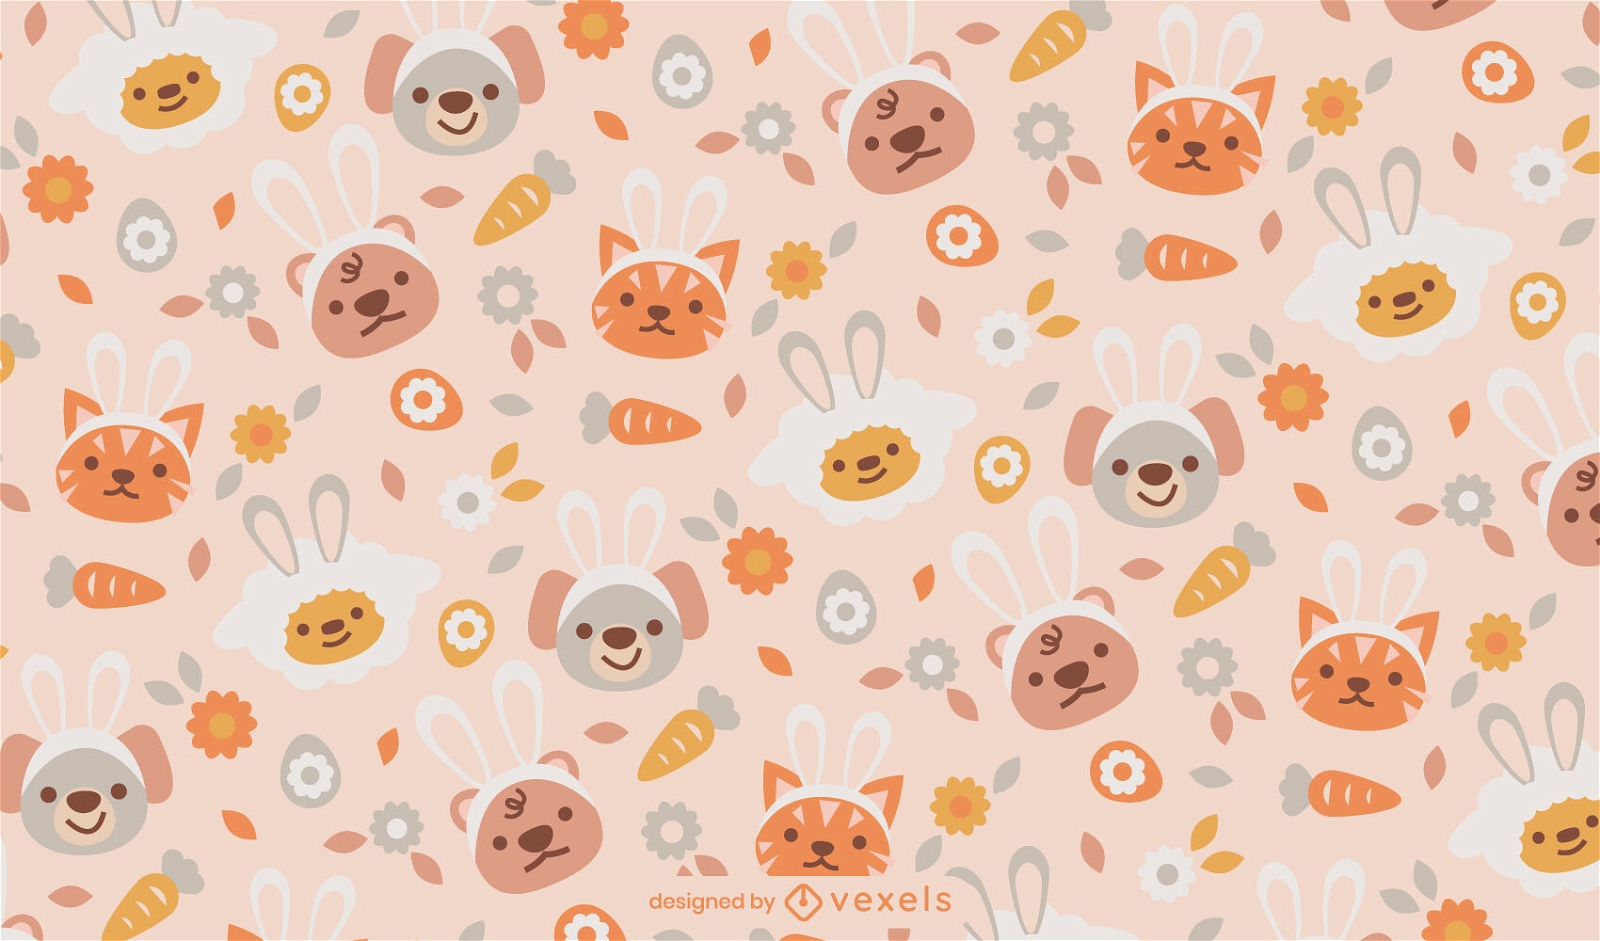 Animals with bunny ears pattern design